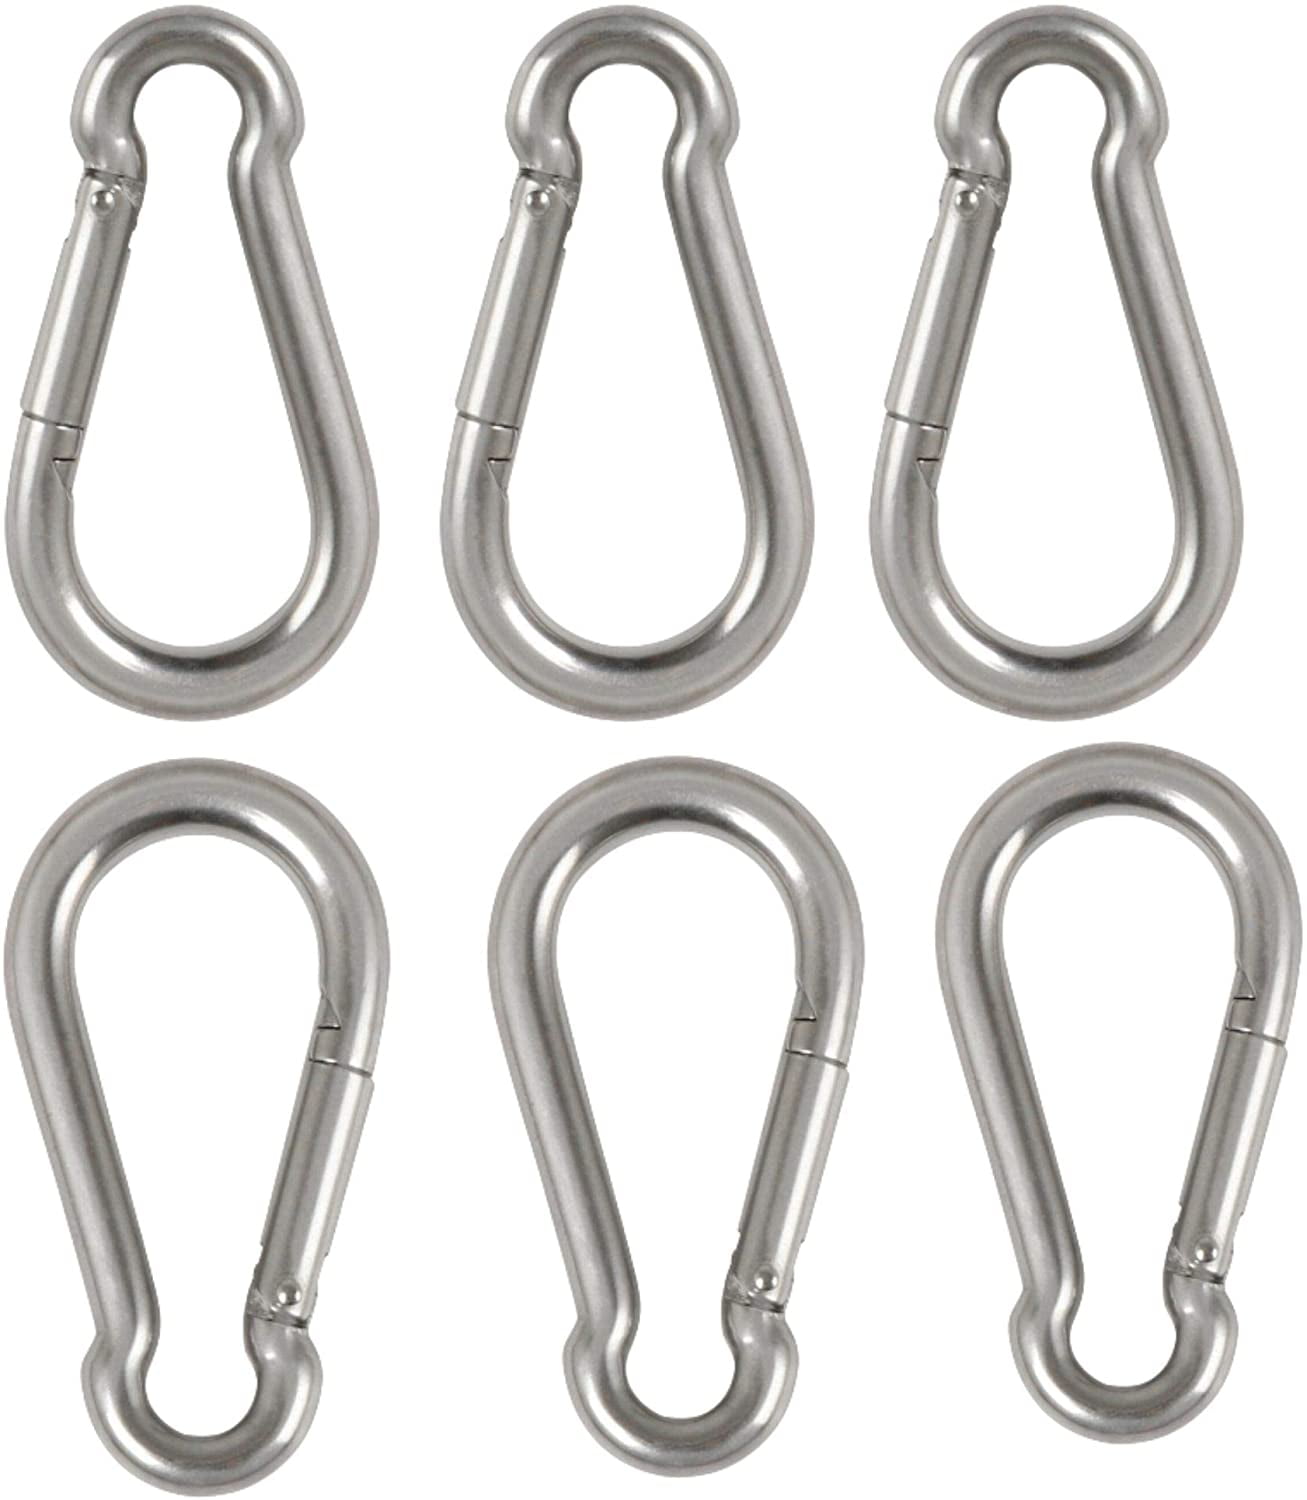 Stainless Steel Carabiner Spring Snap Clip Hooks Keychain Climbing Hook 